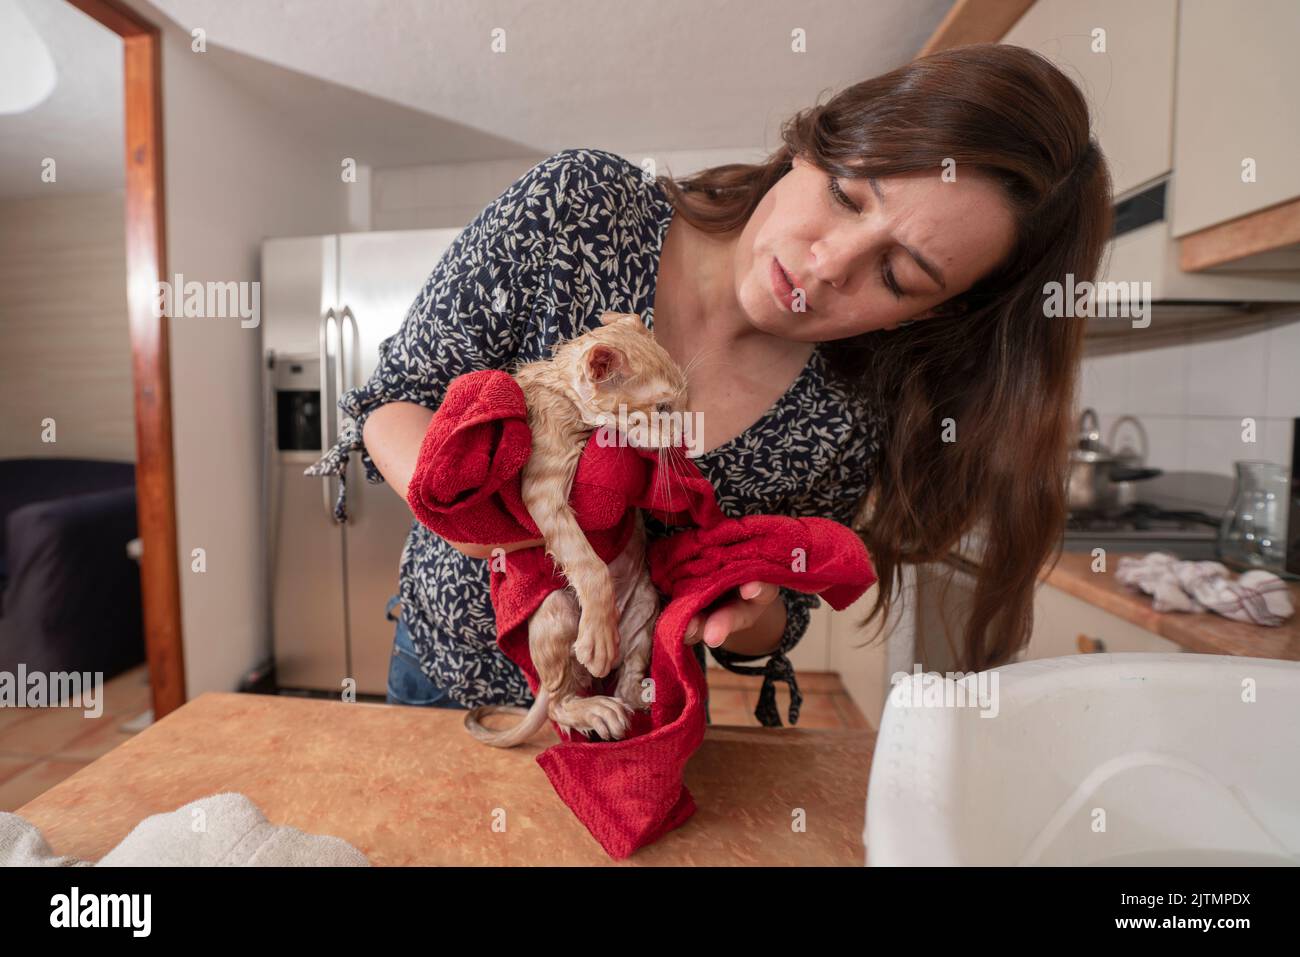 Beautiful young Hispanic woman dressed in a black blouse carefully drying her little light brown baby kitten with a red towel after having bathed her Stock Photo